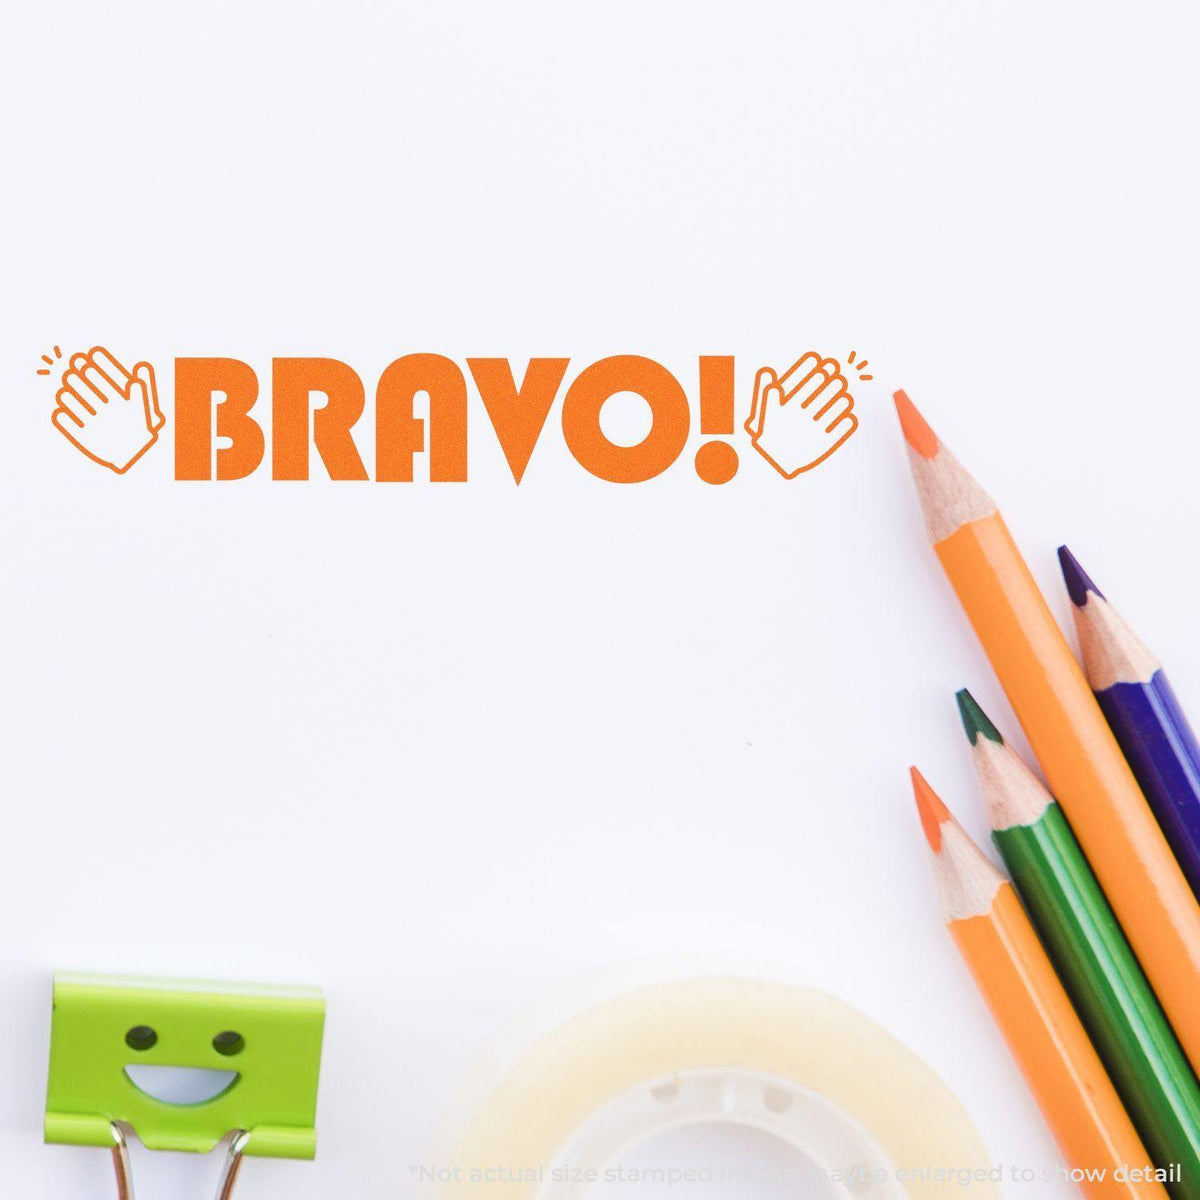 Bravo with Hands Rubber Stamp In Use Photo